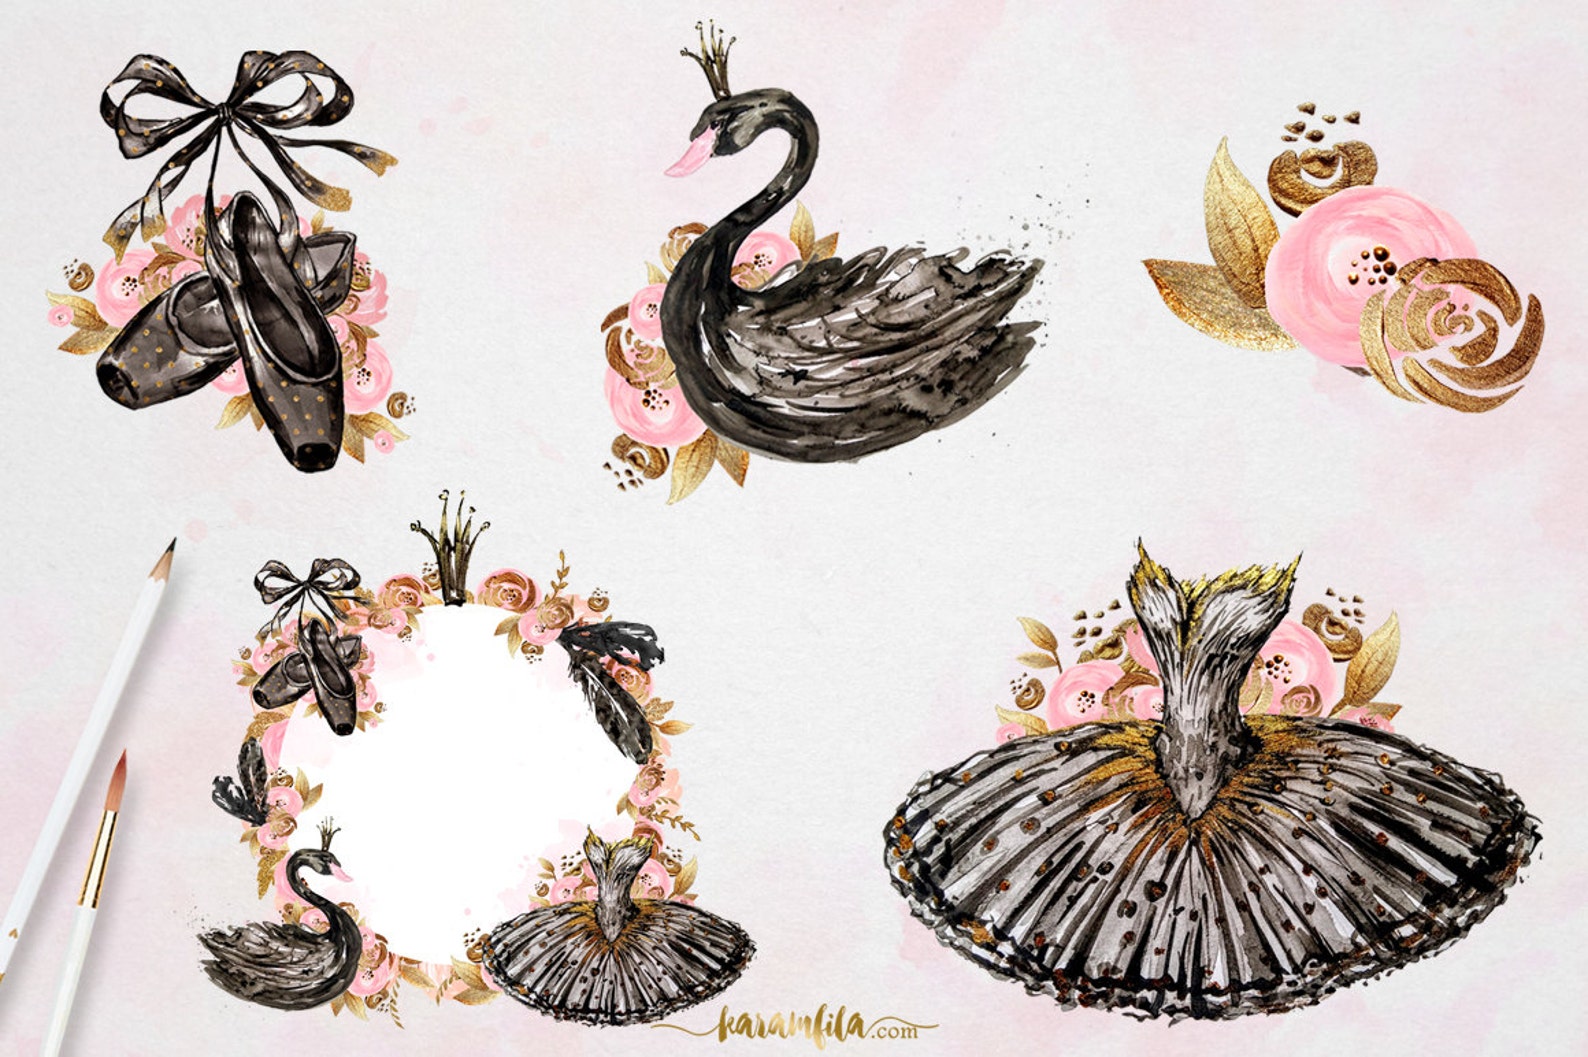 ballerina clipart black swan lake watercolor ballet illustration handpainted pointe shoes tutu dress feather crown gold glitter